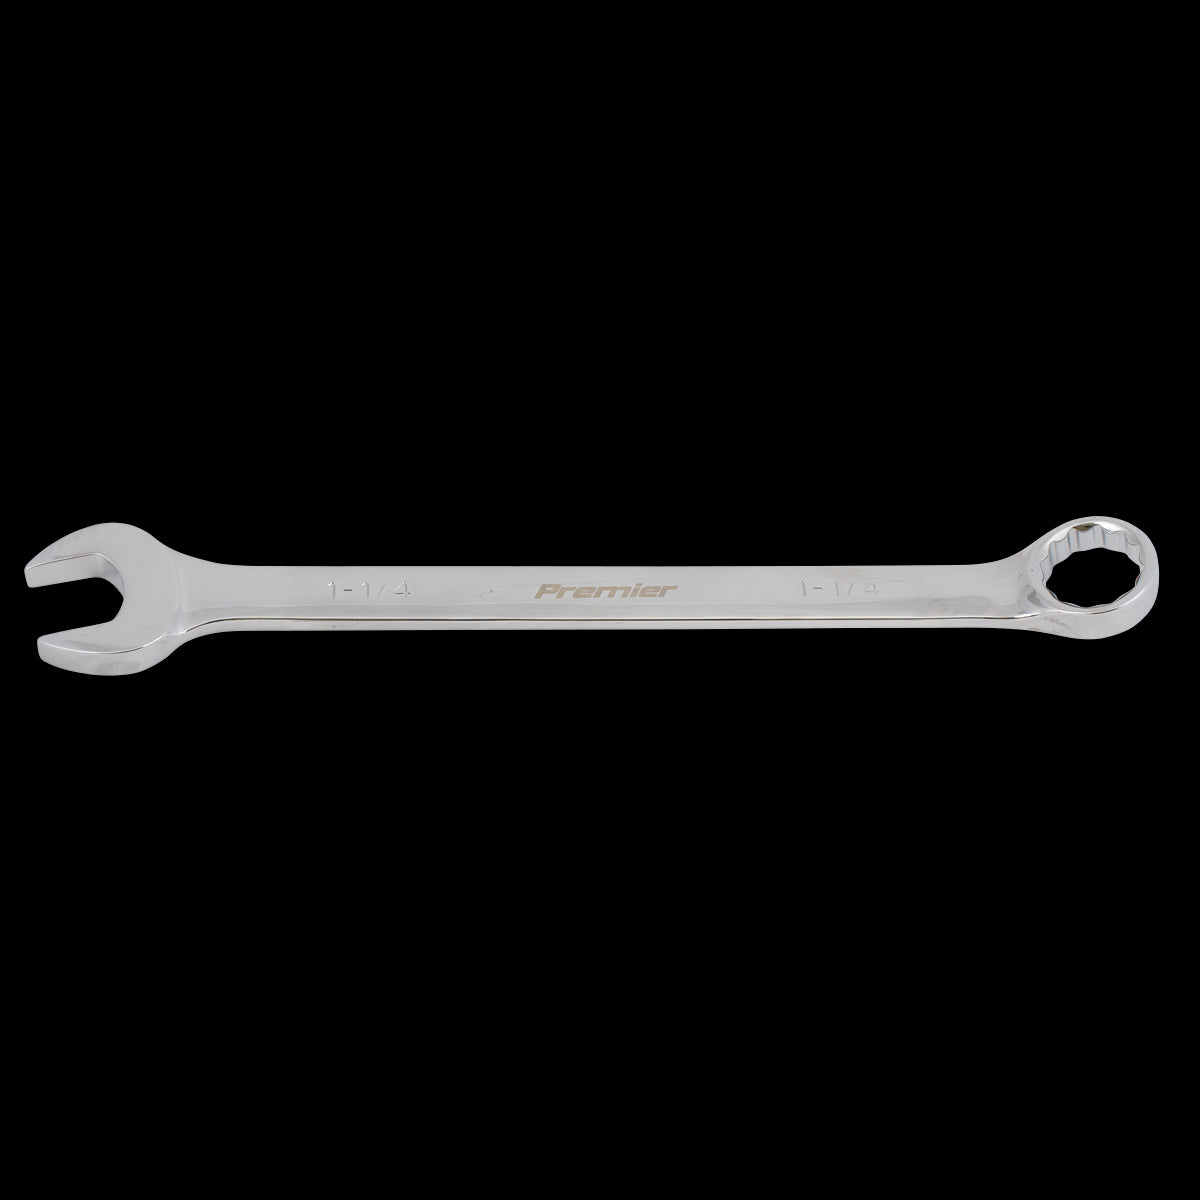 Sealey Premier Combination Spanner 1-1/4" - Imperial